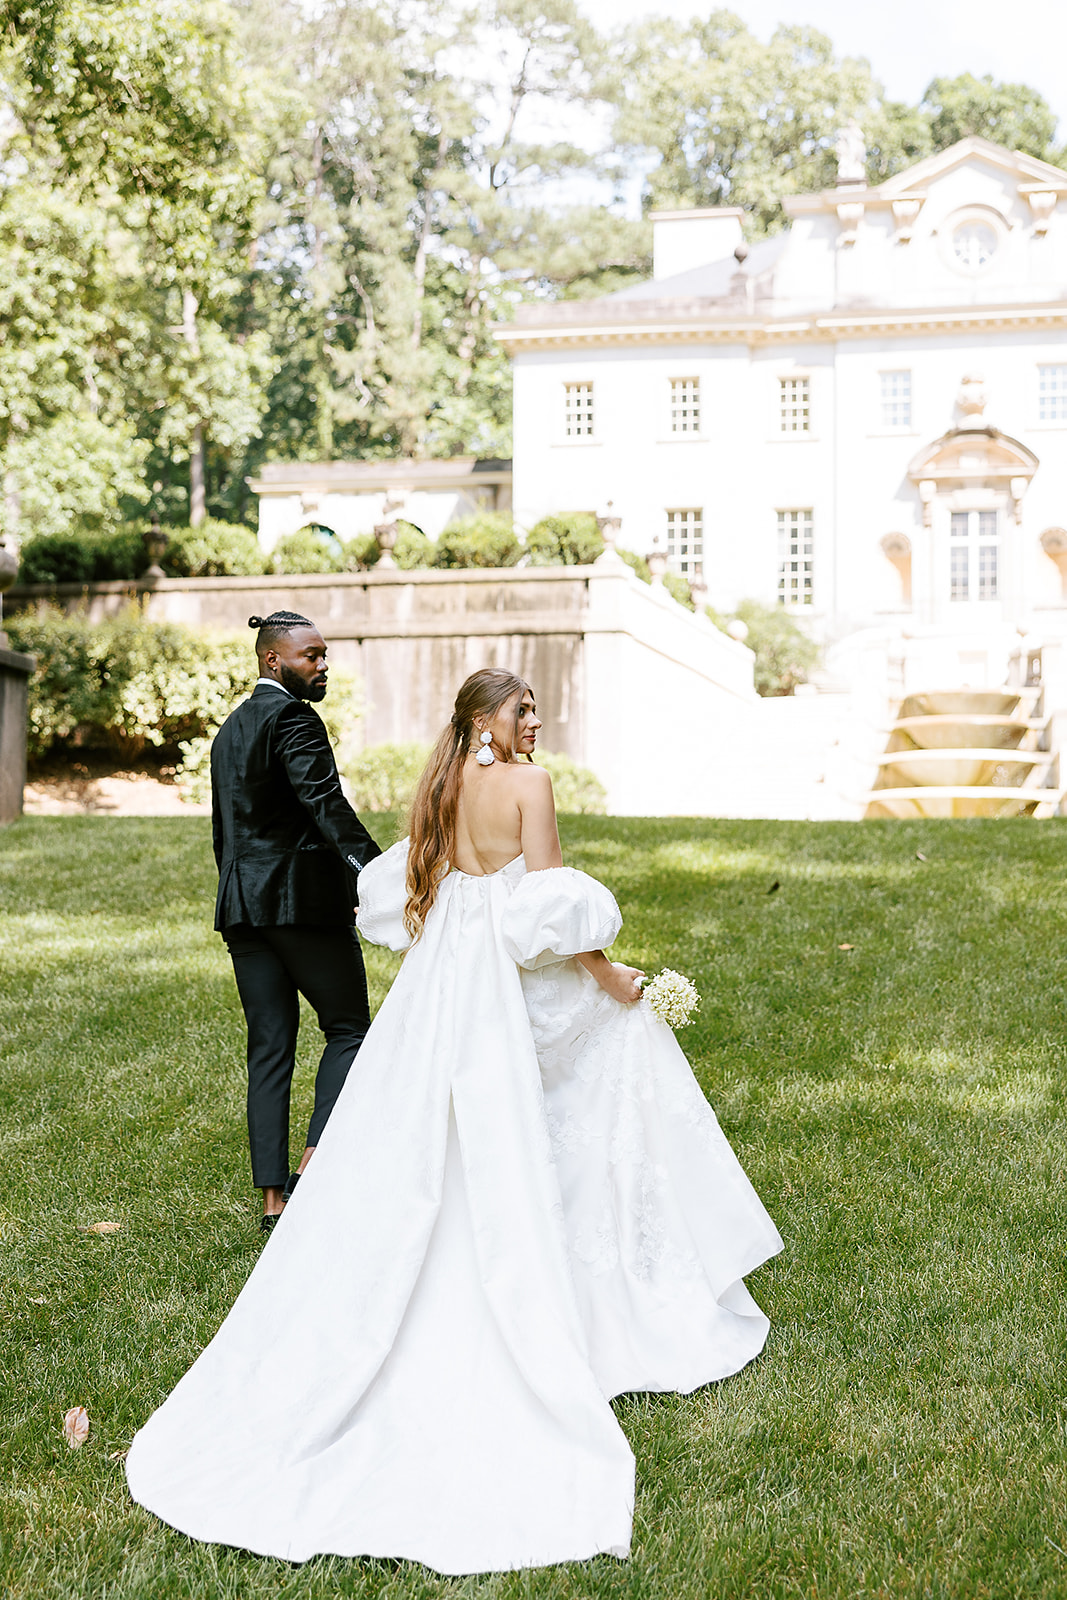 A SWAN HOUSE ANNIVERSARY EDITORIAL IN ATLANTA, GA SHOT OF BRIDE. ANDGROOM WALKING ON THE LAWN WITH WATERFALL IN THE BACK